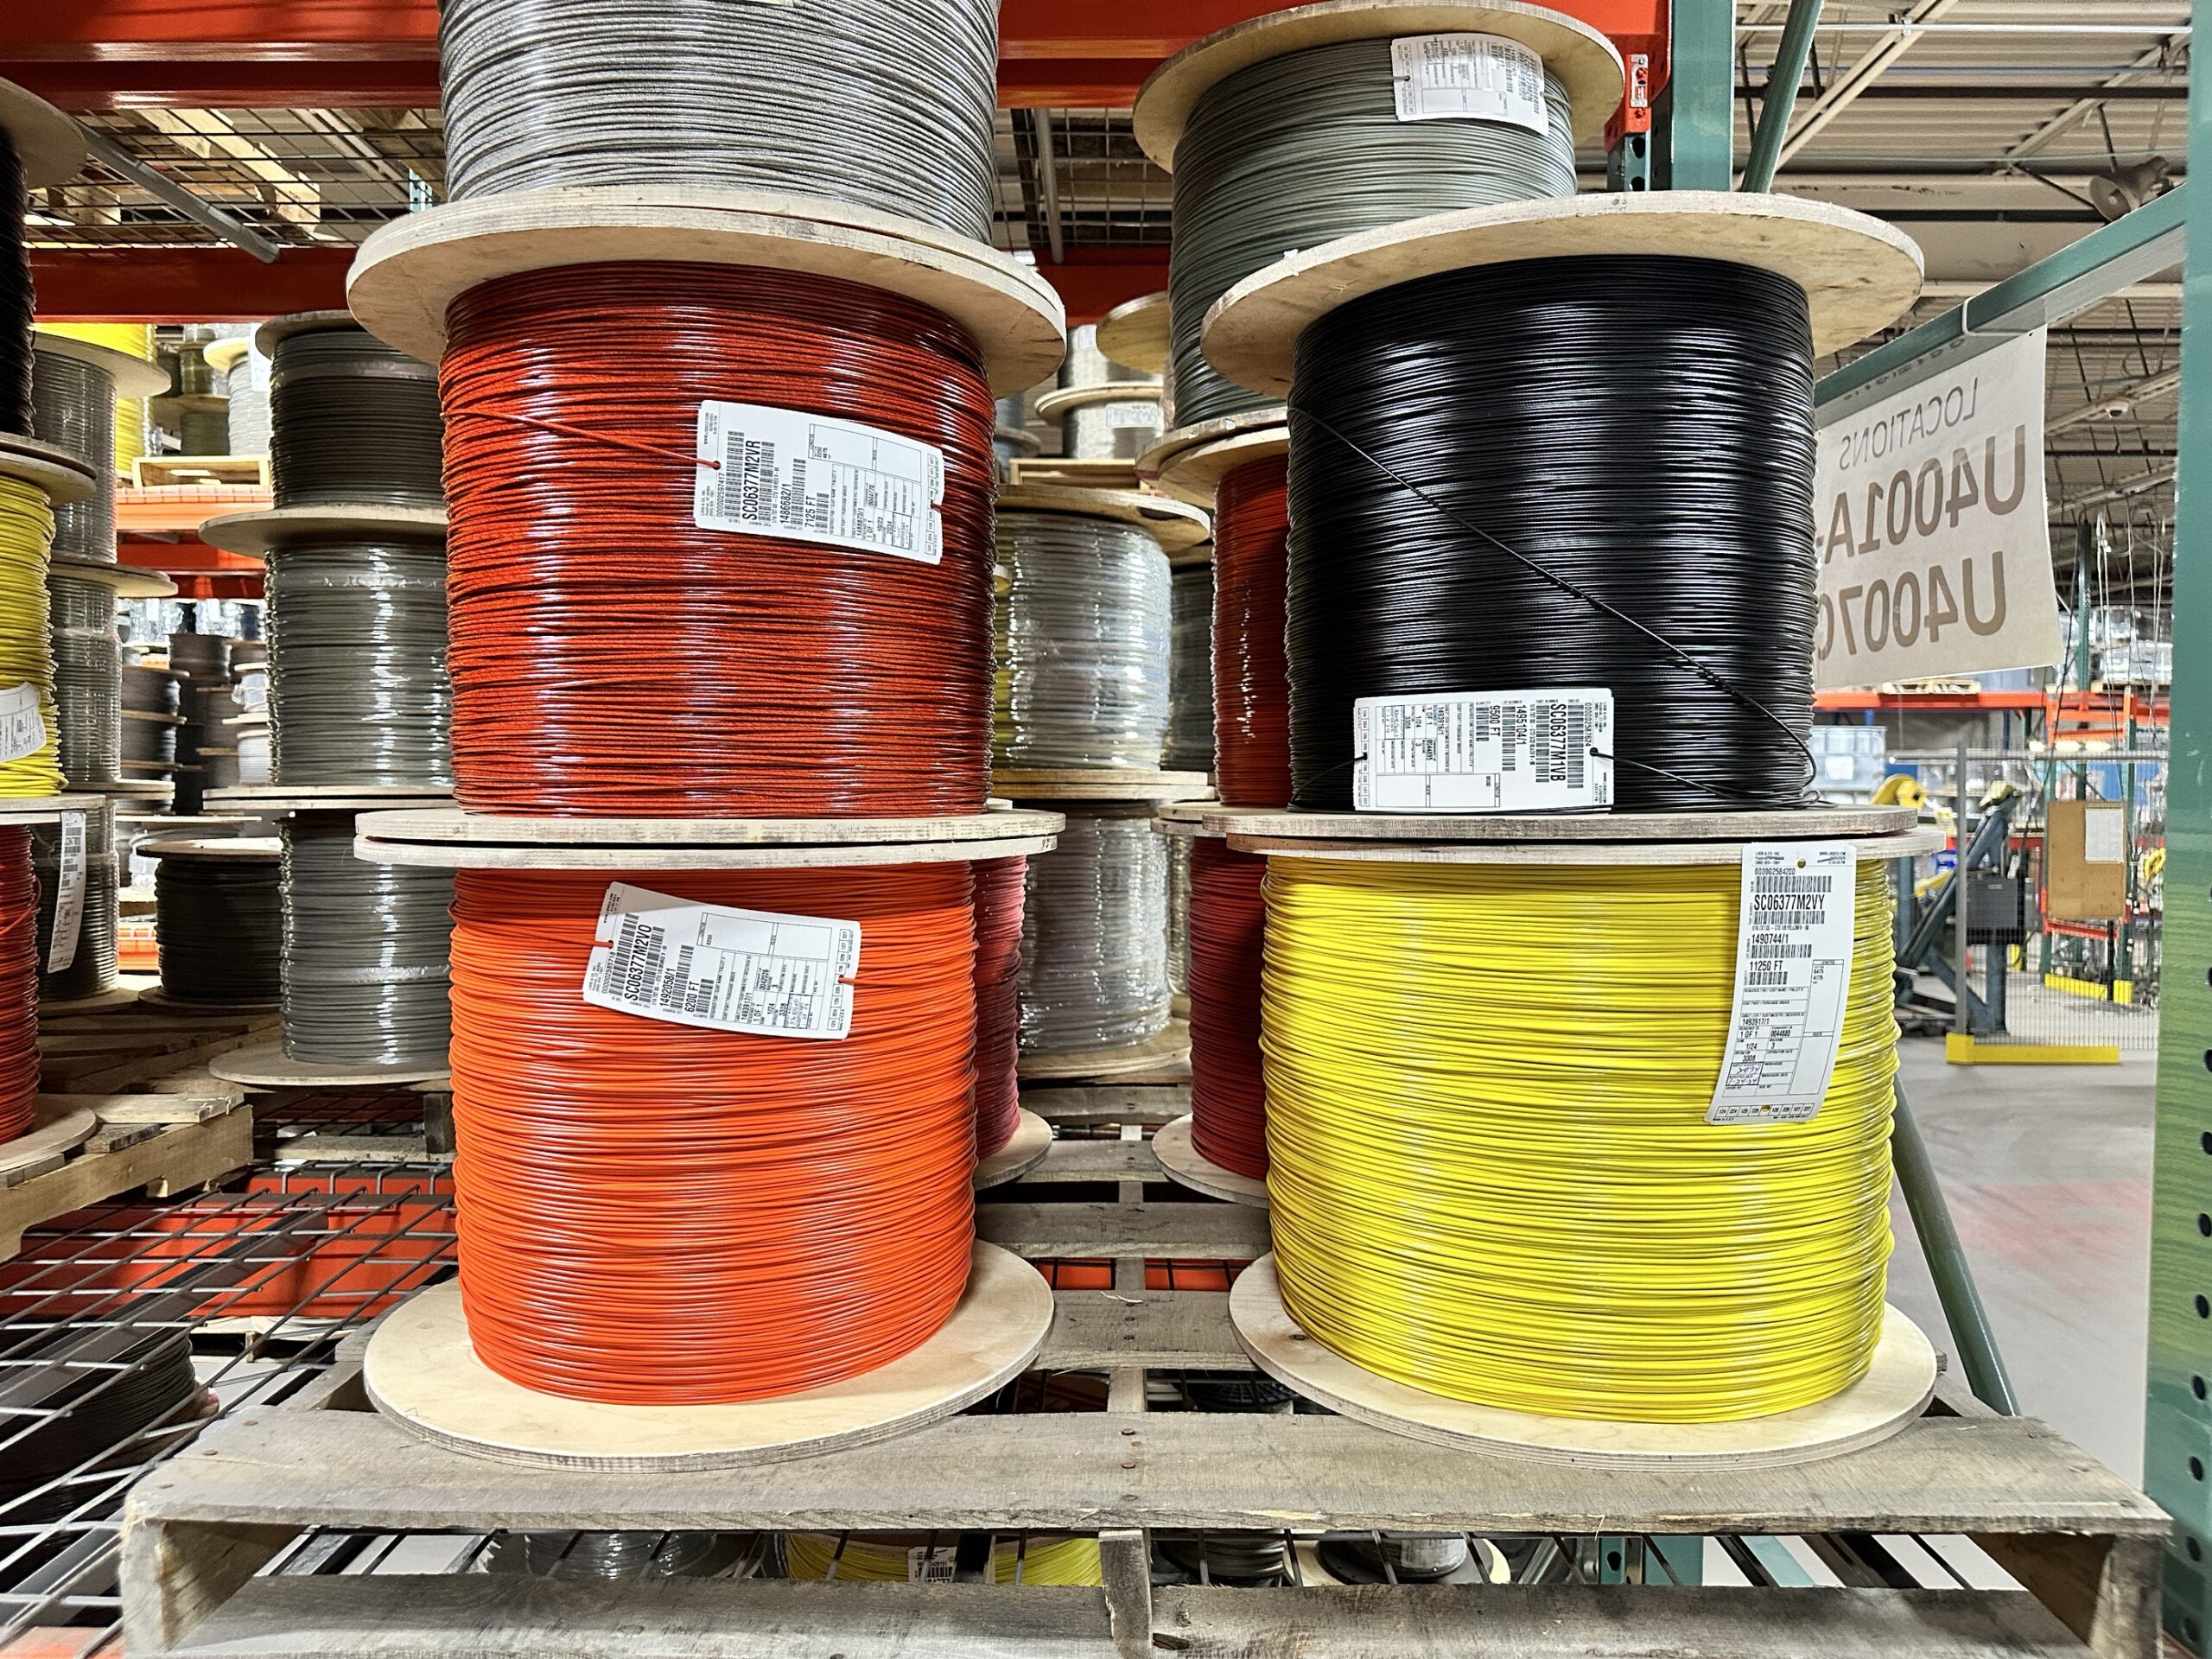 Coated cable spools